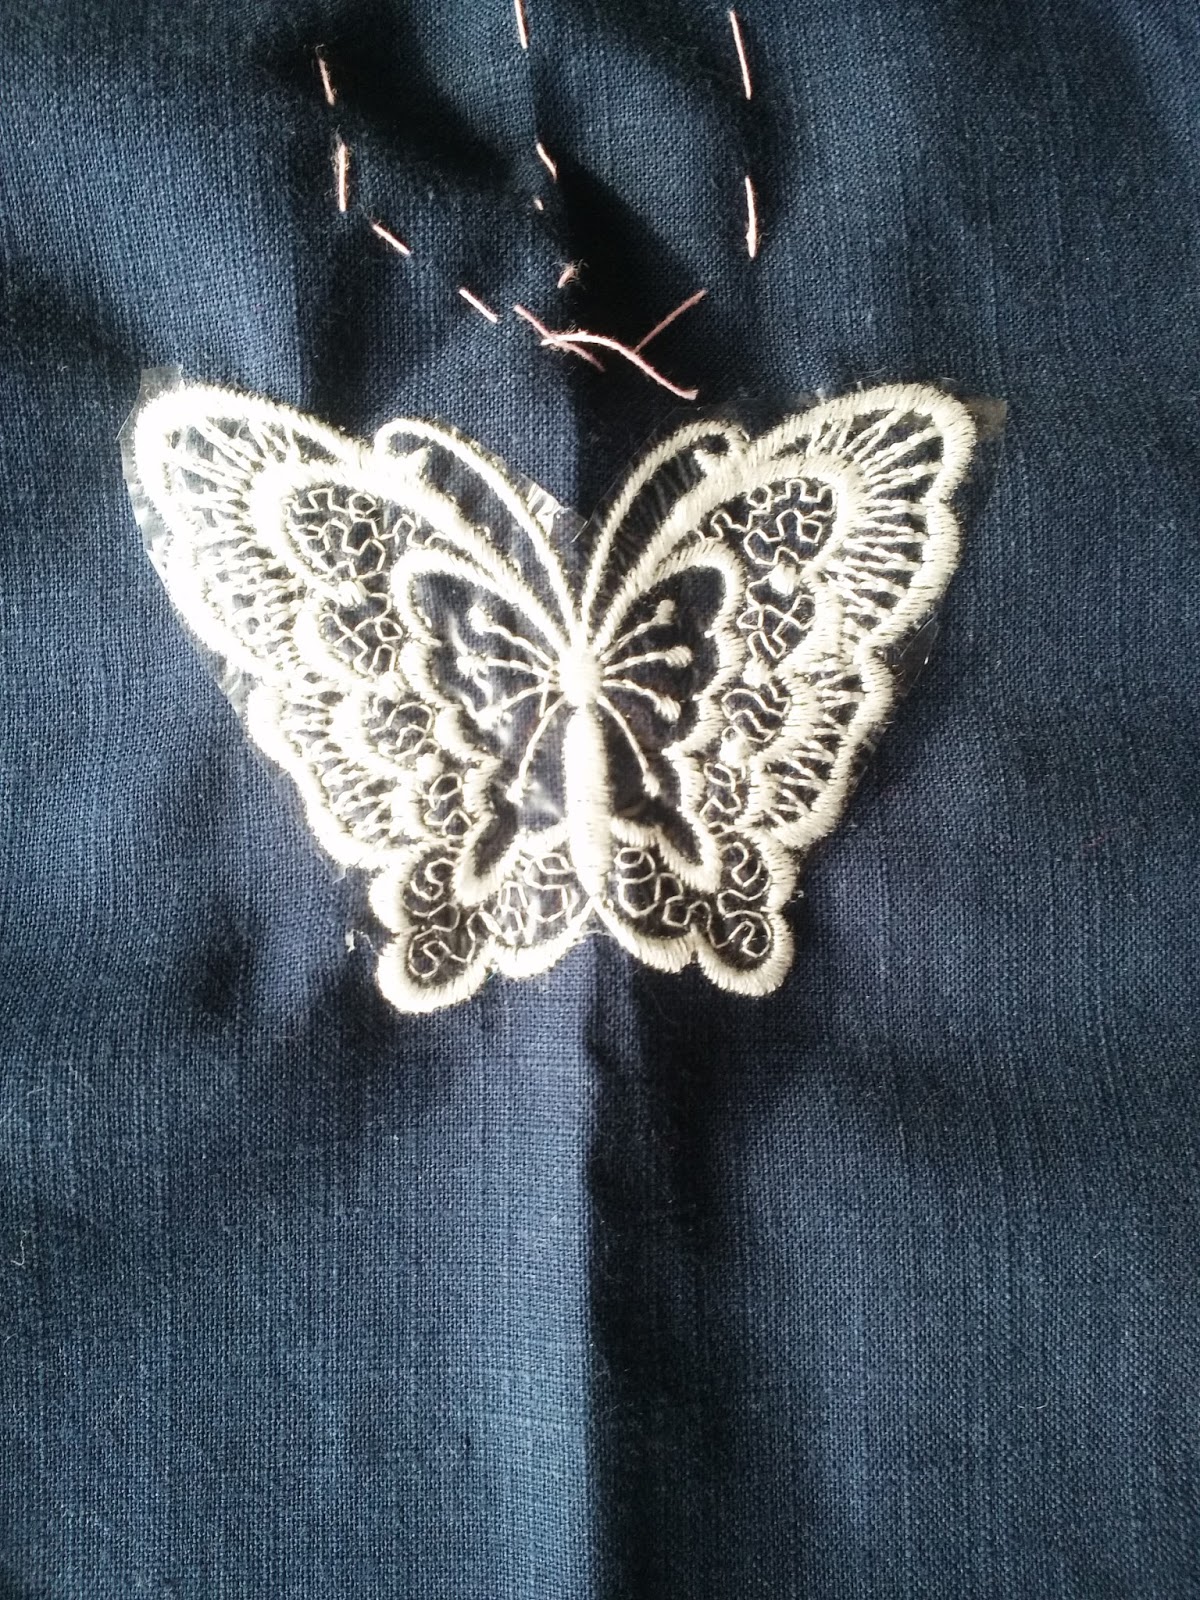 SewAngelicThreads: Making a tunic top with lace made on my Brother Innov-is  NV 800E embroidery machine